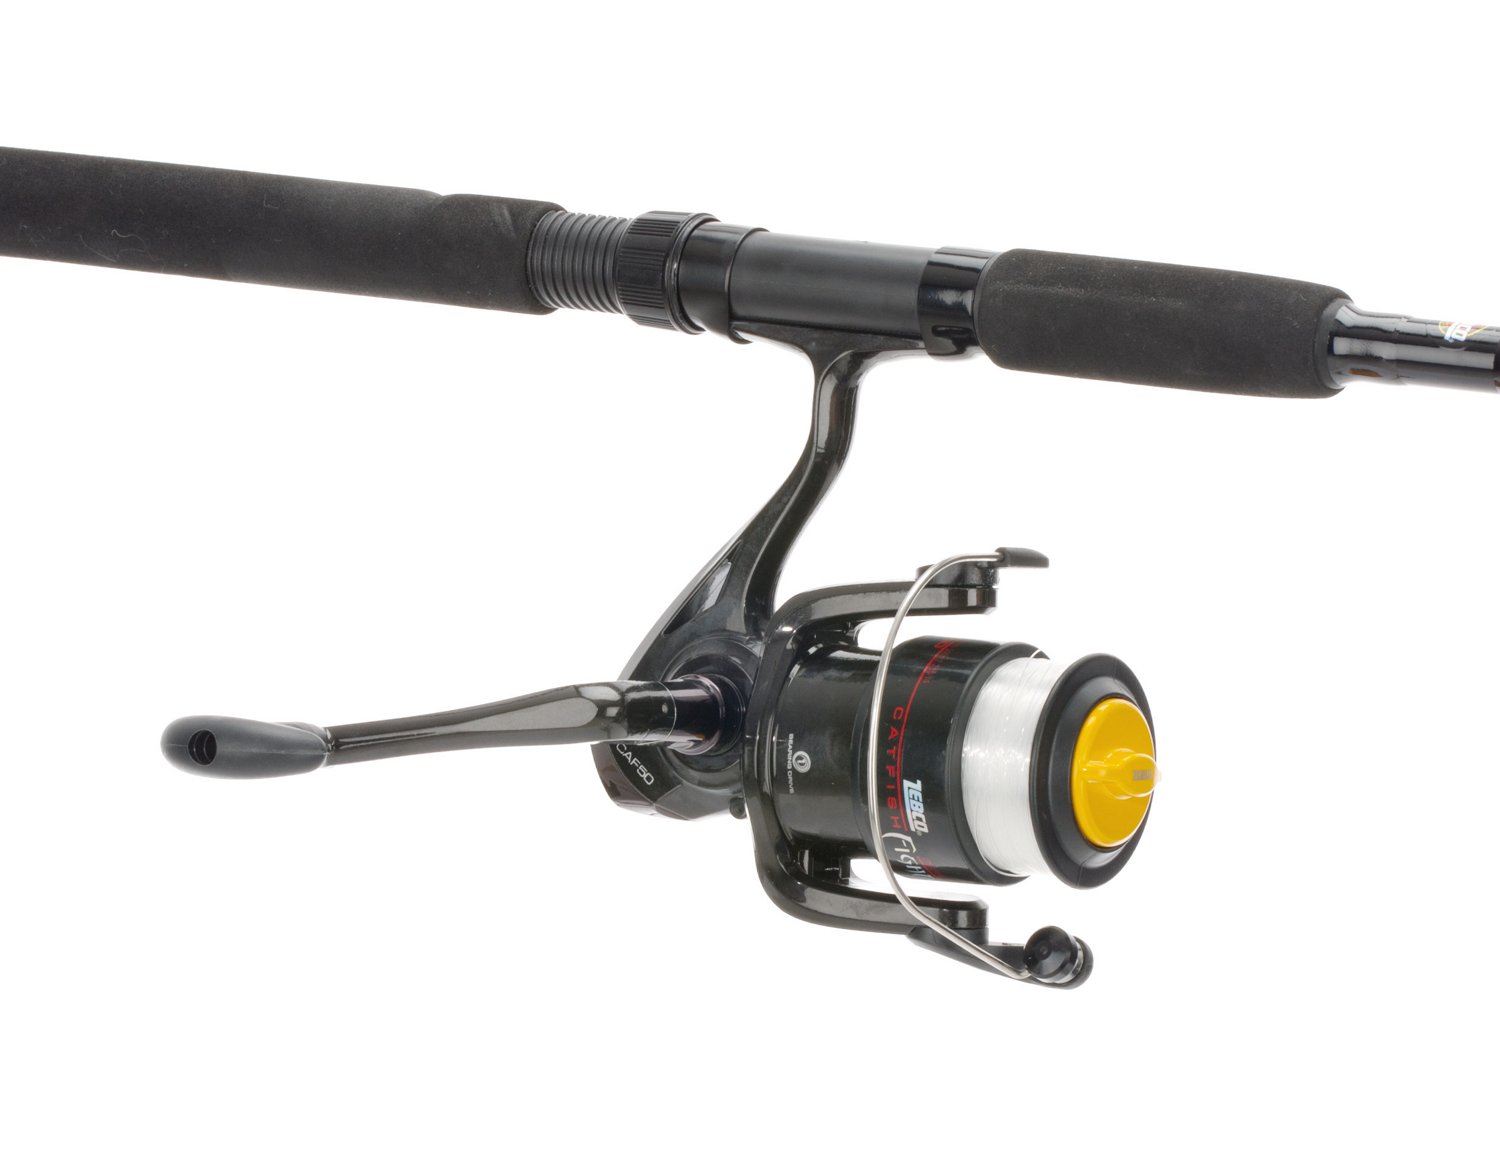 Zebco Catfish Fighter 7' Freshwater Spinning Rod and Reel